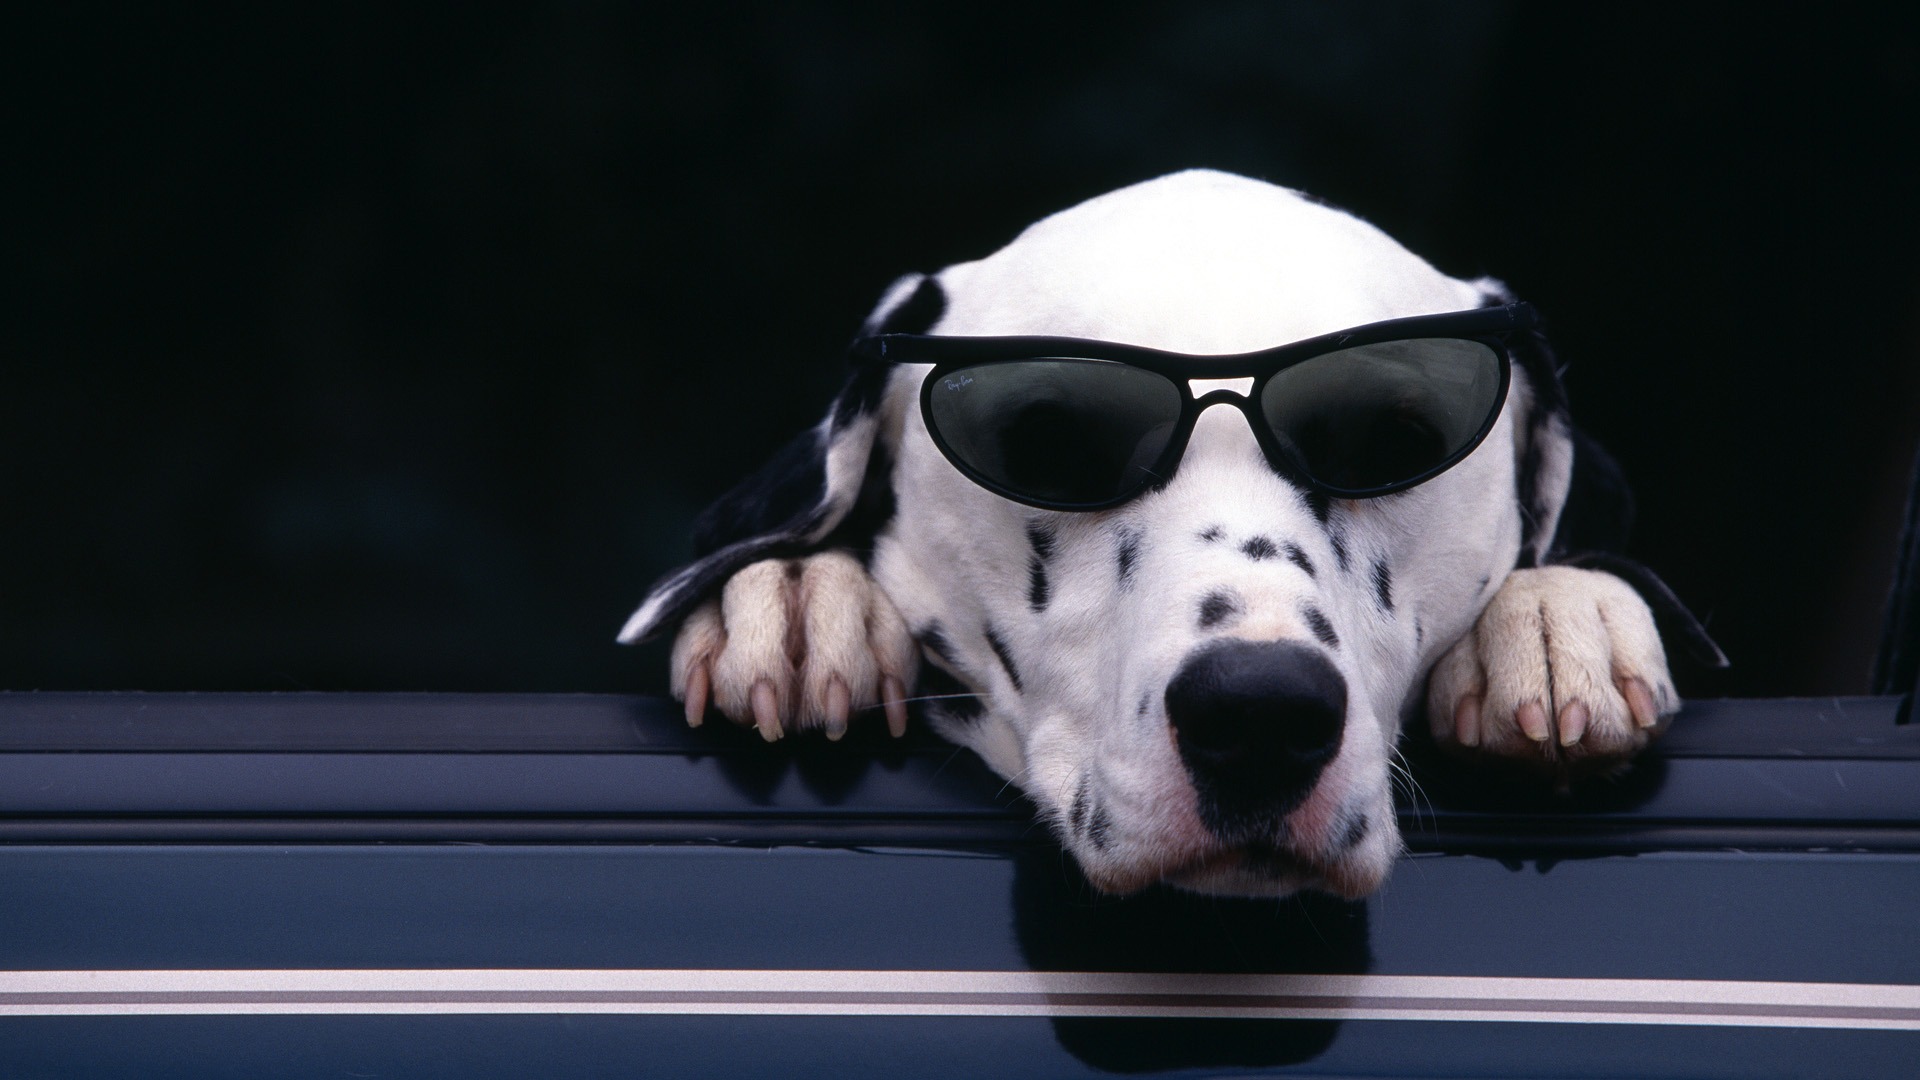 Cool Dog with Shades widescreen wallpaper | Wide-Wallpapers.NET